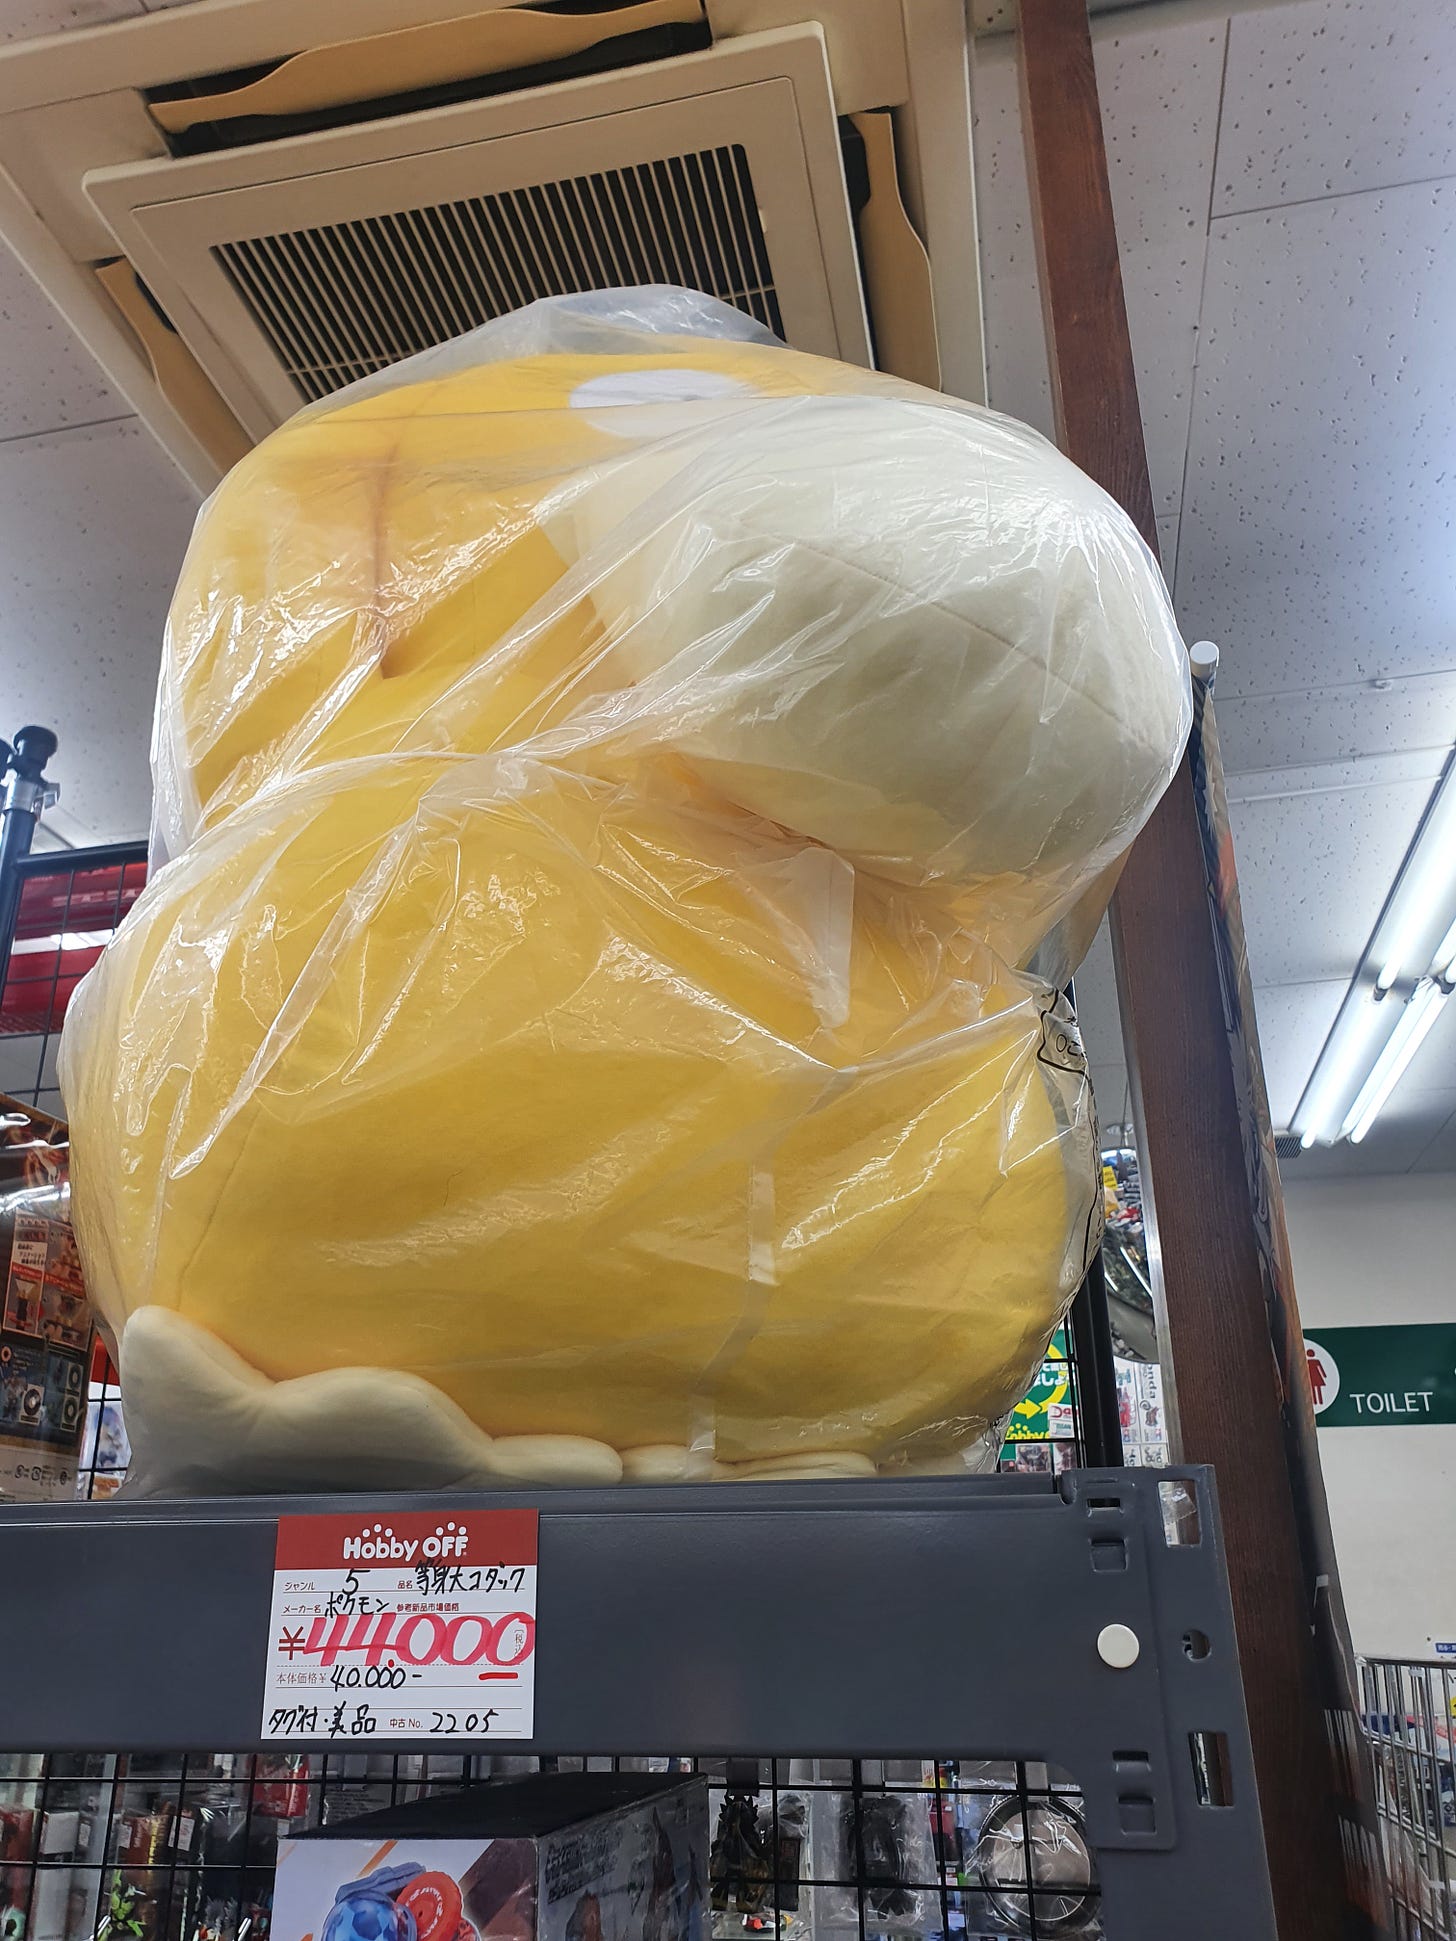 A gigantic Psyduck plush toy, wrapped in its original packaging. Set him free!